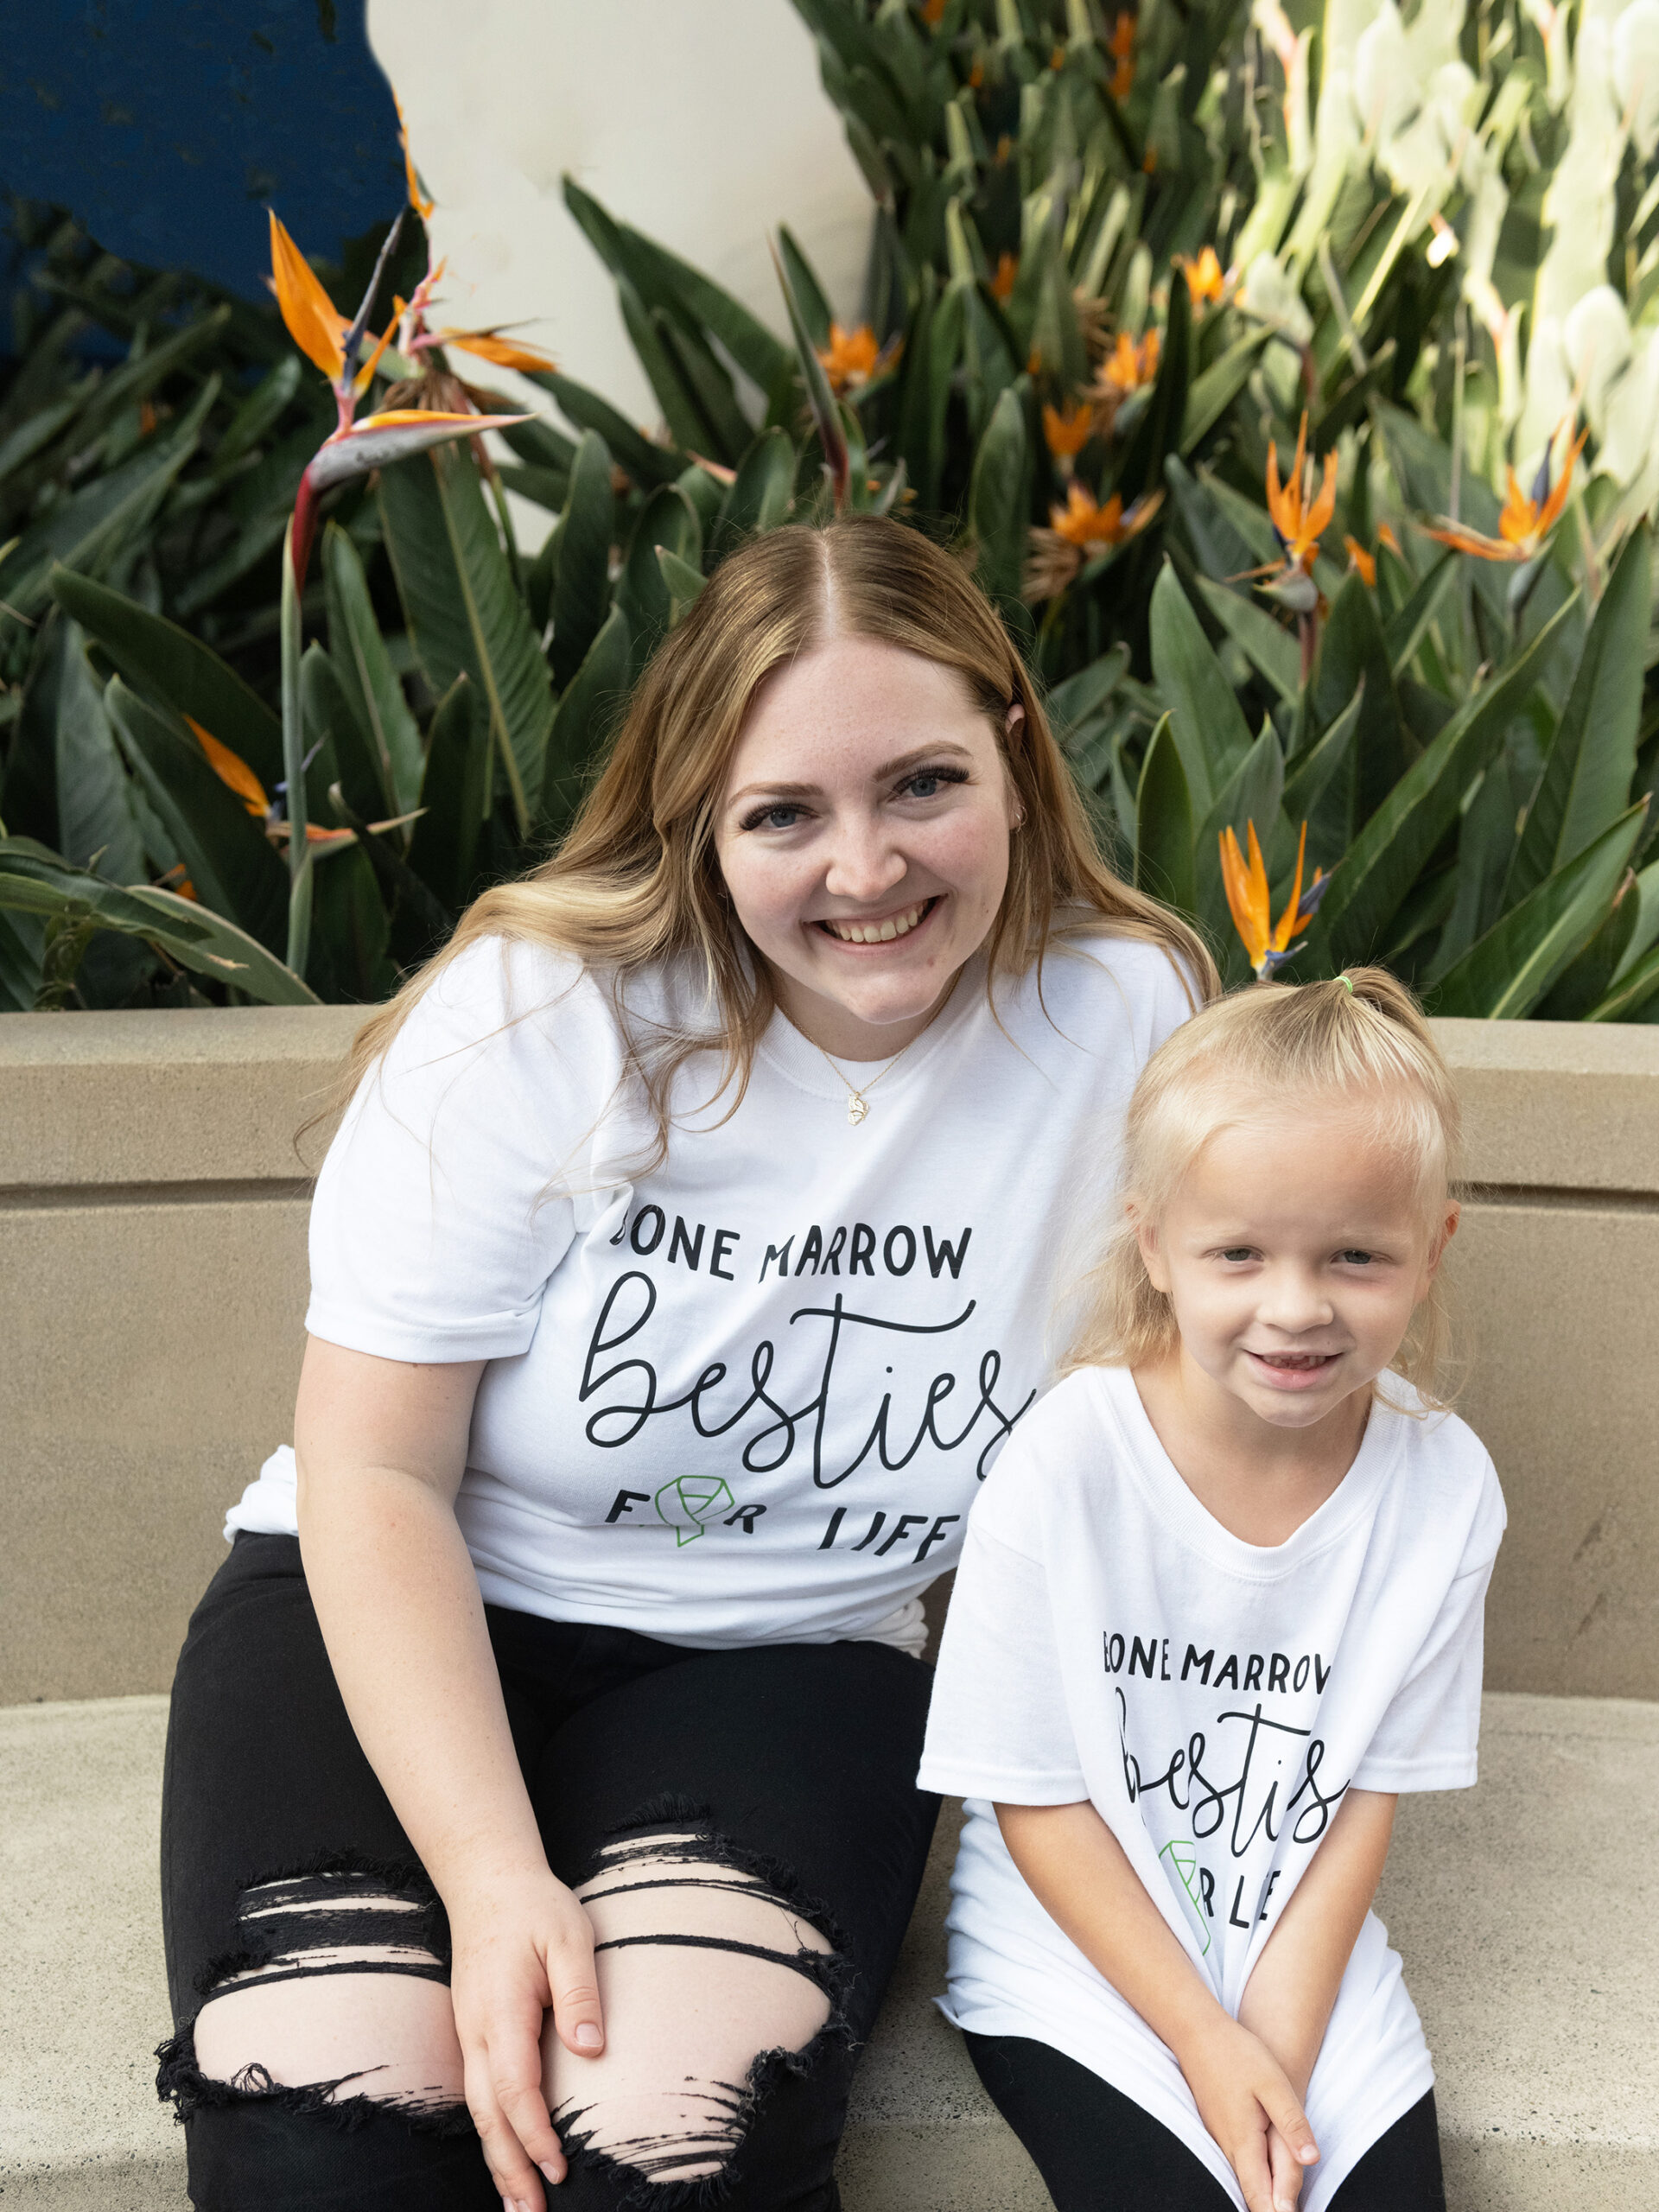 Harper and Kortnie smiling together in tshirts that say "Bone marrow besties for life"